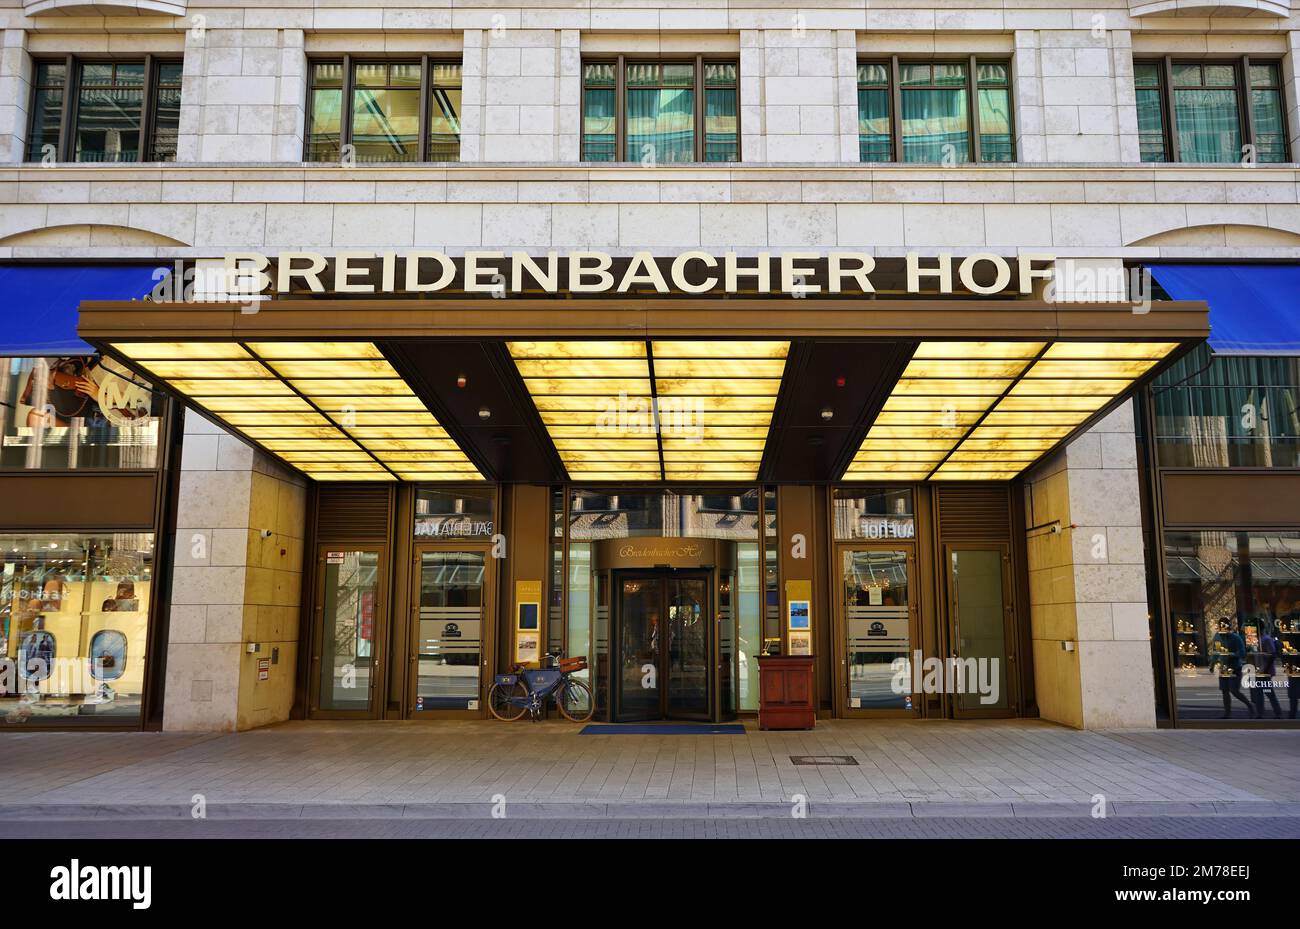 Front view of the luxury hotel „Breidenbacher Hof“ at Königsallee in Düsseldorf/Germany. The hotel has a tradition of more than 200 years. Stock Photo